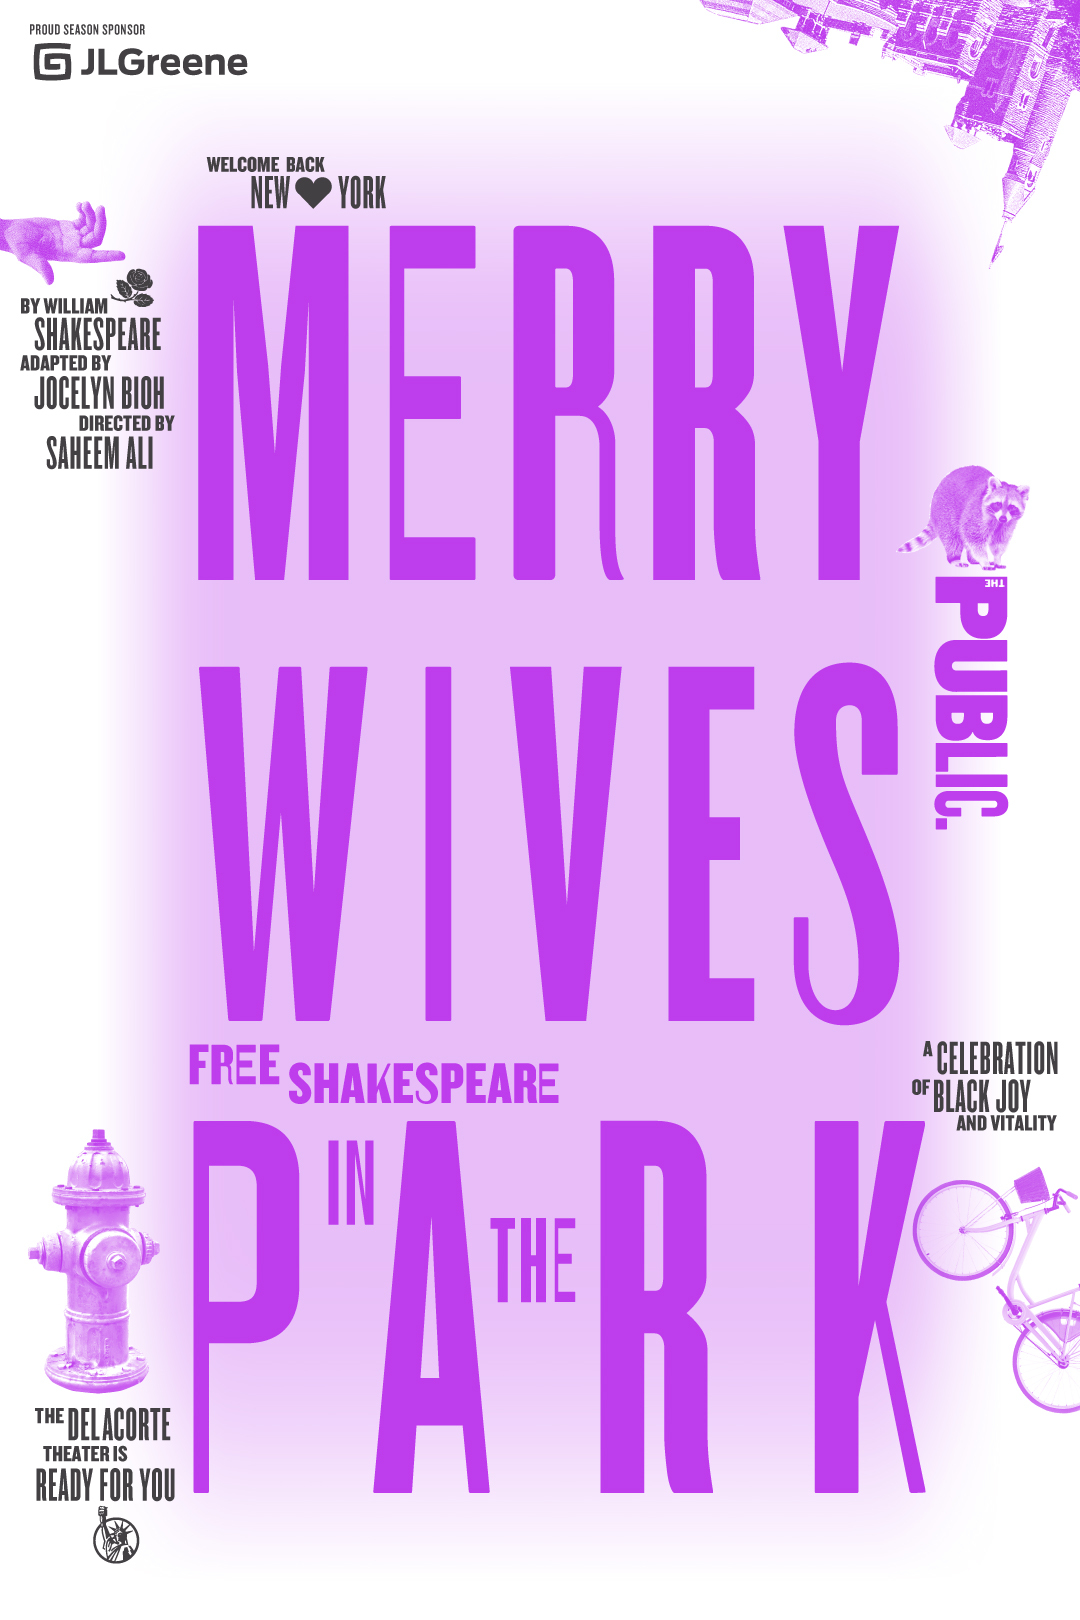 Free Shakespeare in the Park Merry Wives, purple text on light purple background, Proud Season Sponsor JL Greene, black text on white background, Welcome back New York, black text on white background, A celebration of Black joy and vitality, black text on white background